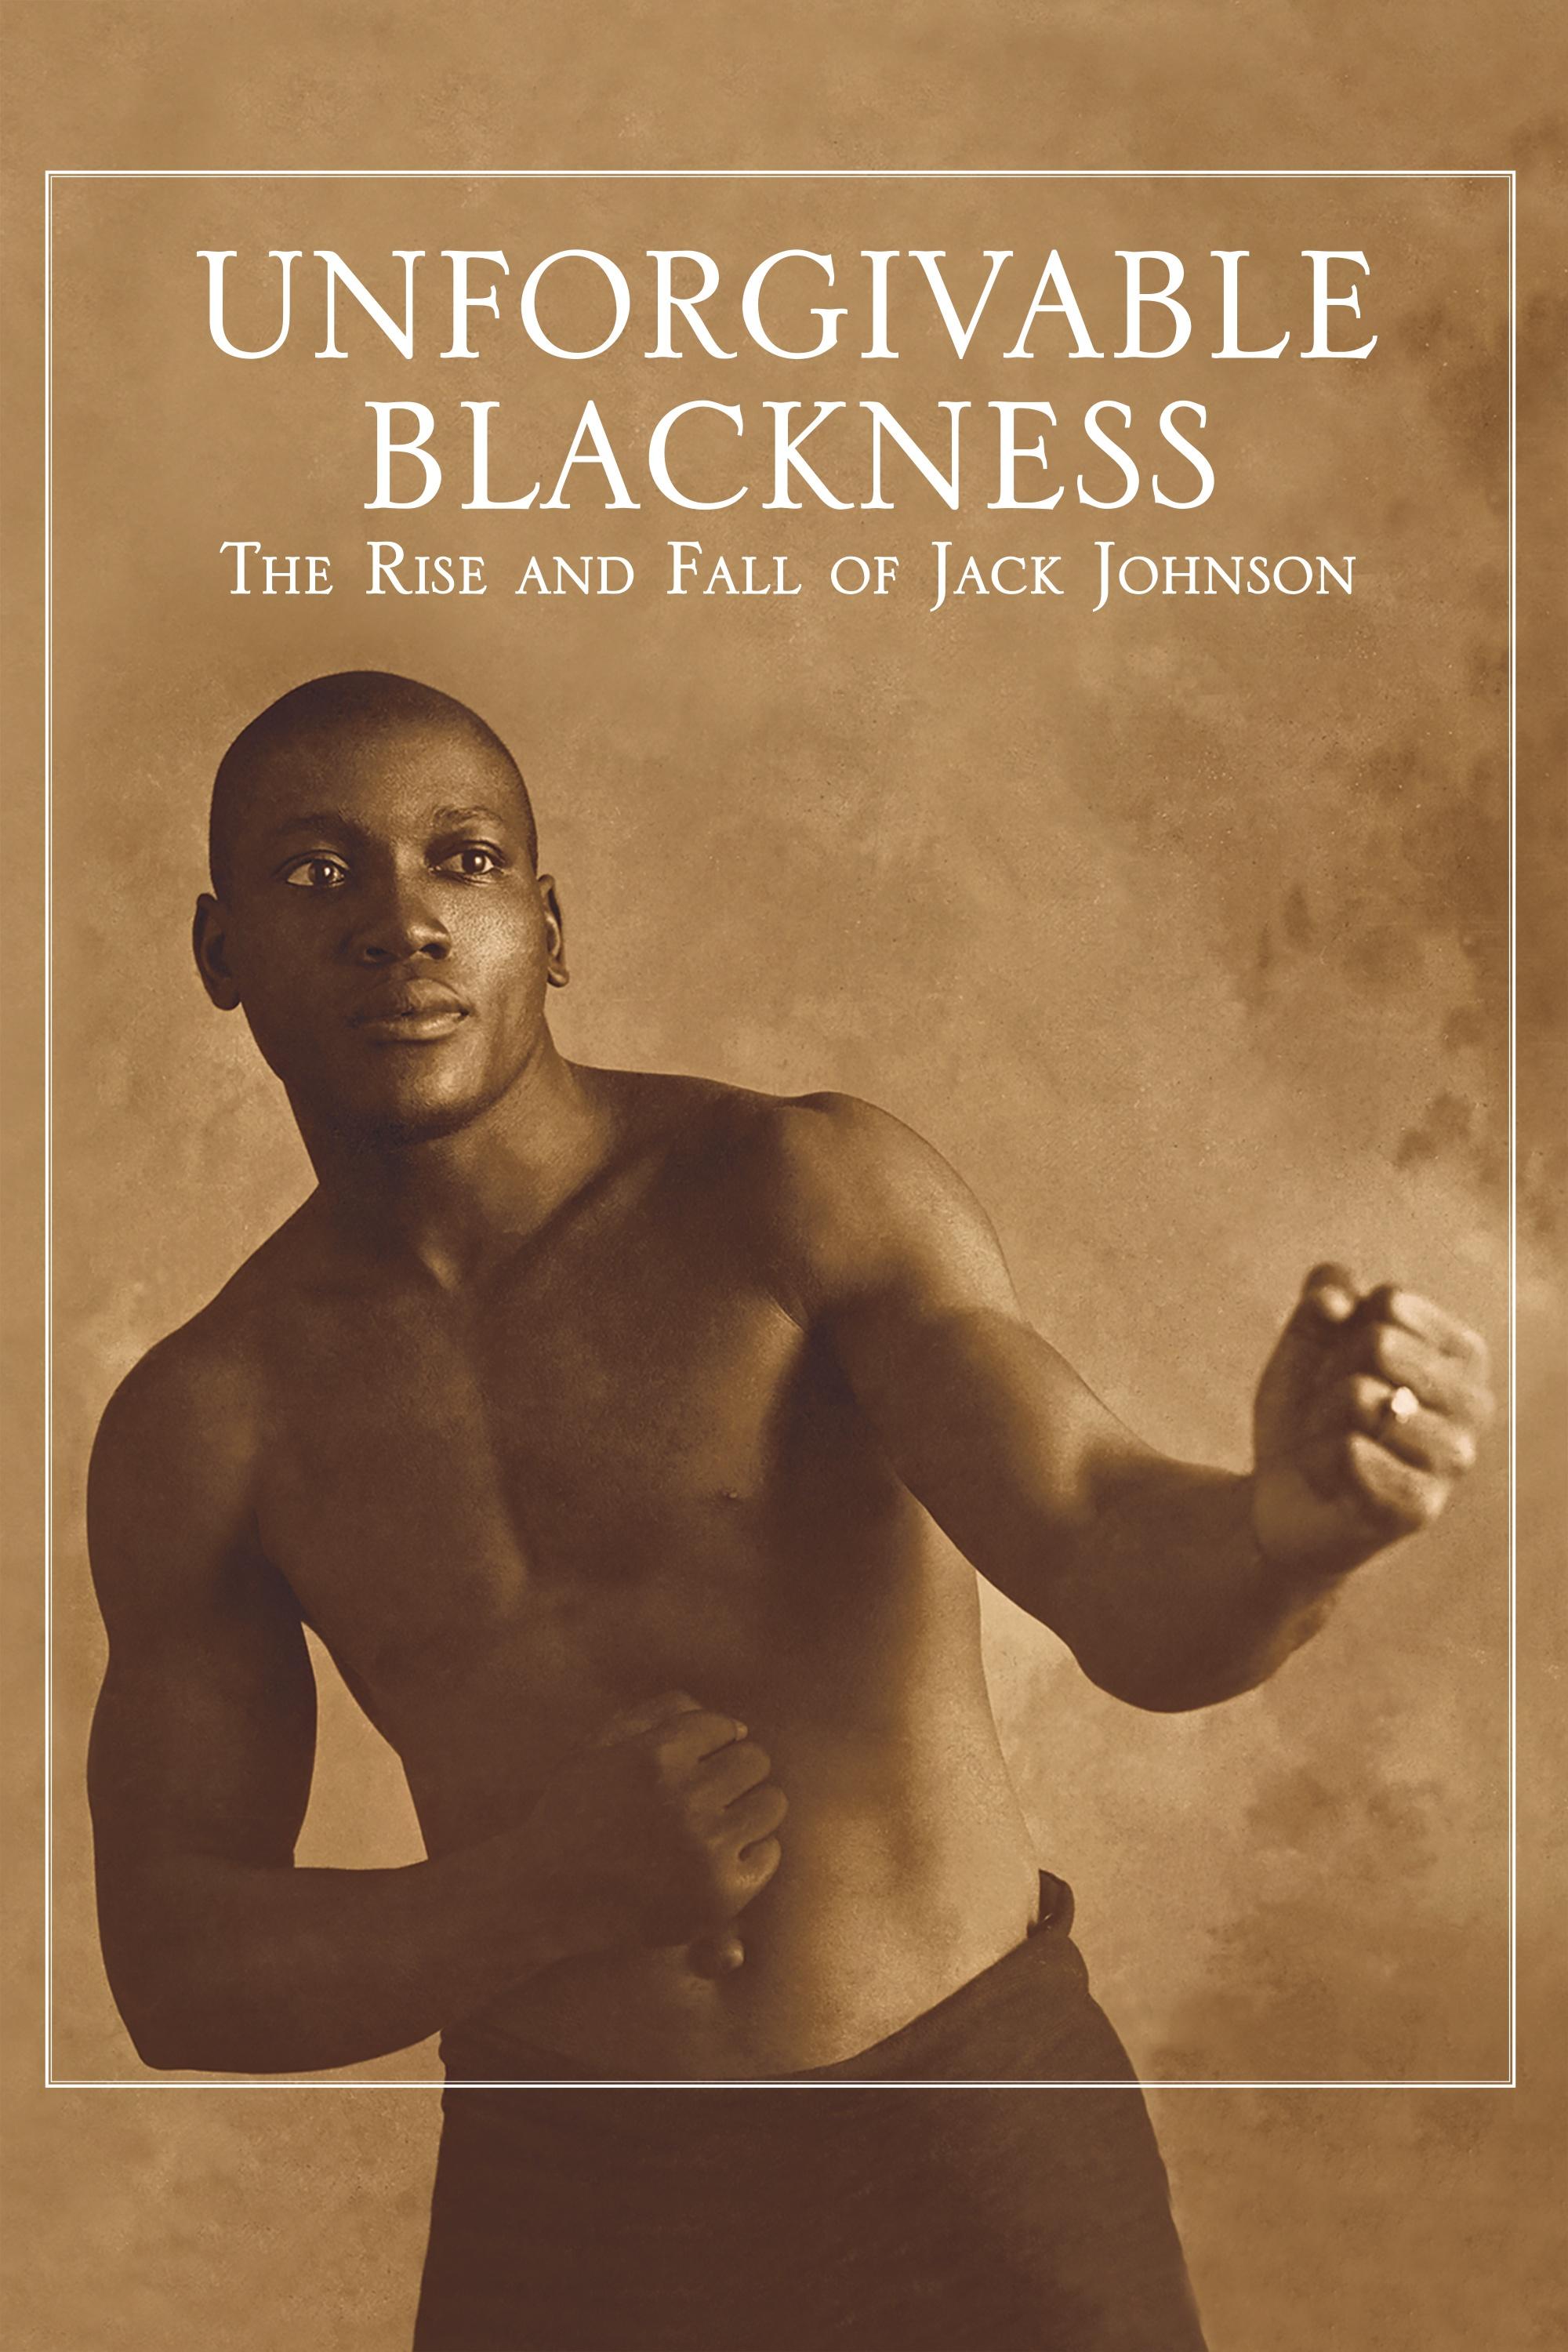 Unforgivable Blackness: The Rise and Fall of Jack Johnson show's poster